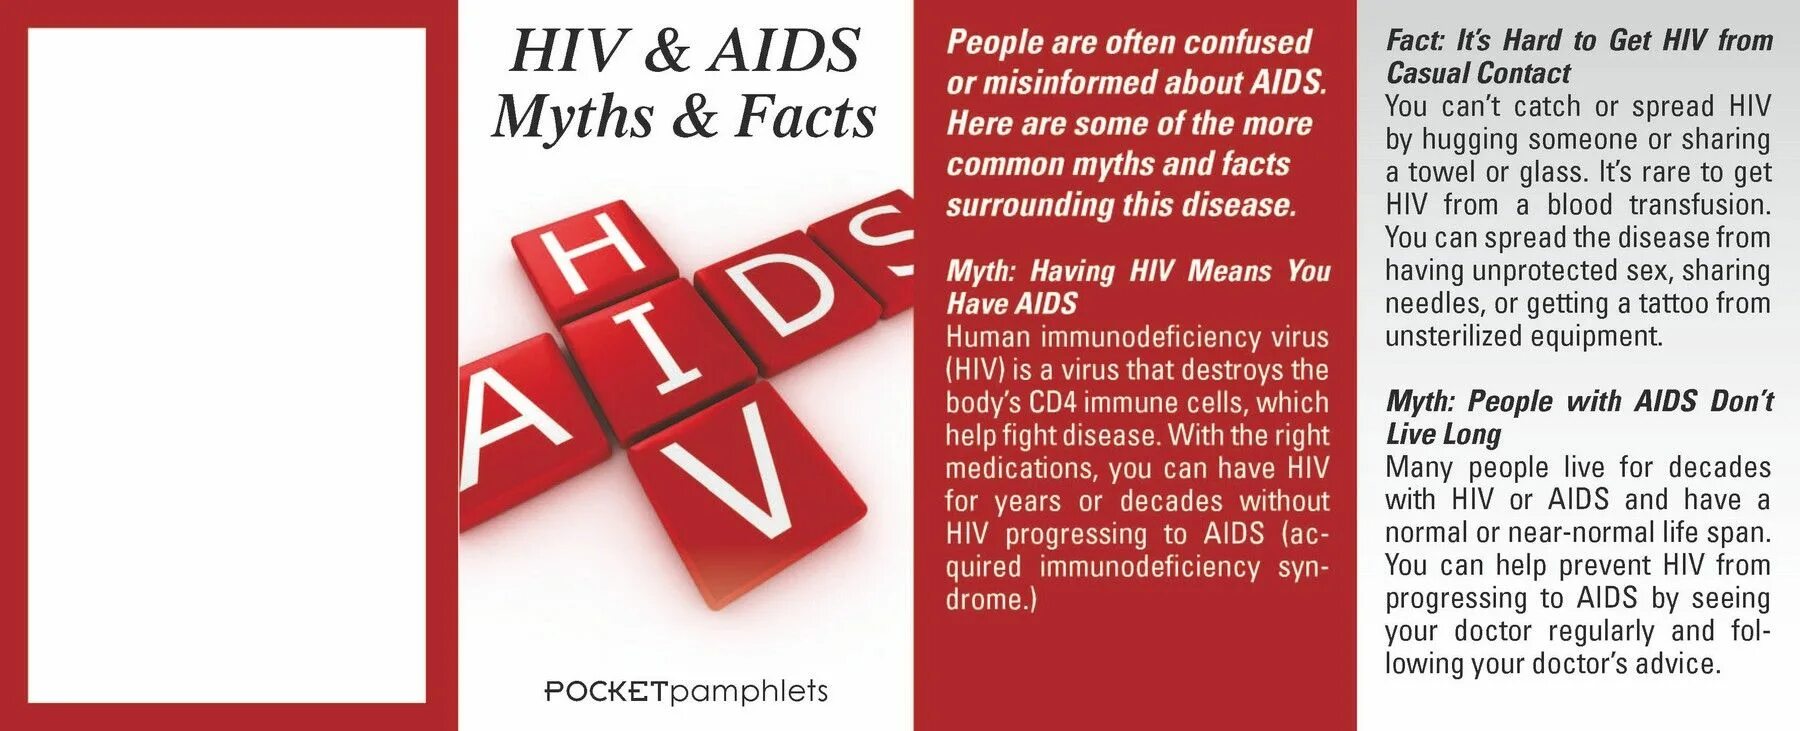 Спид ап дед. About AIDS. HIV AIDS. Myths about HIV and AIDS. Pamphlet for HIV.